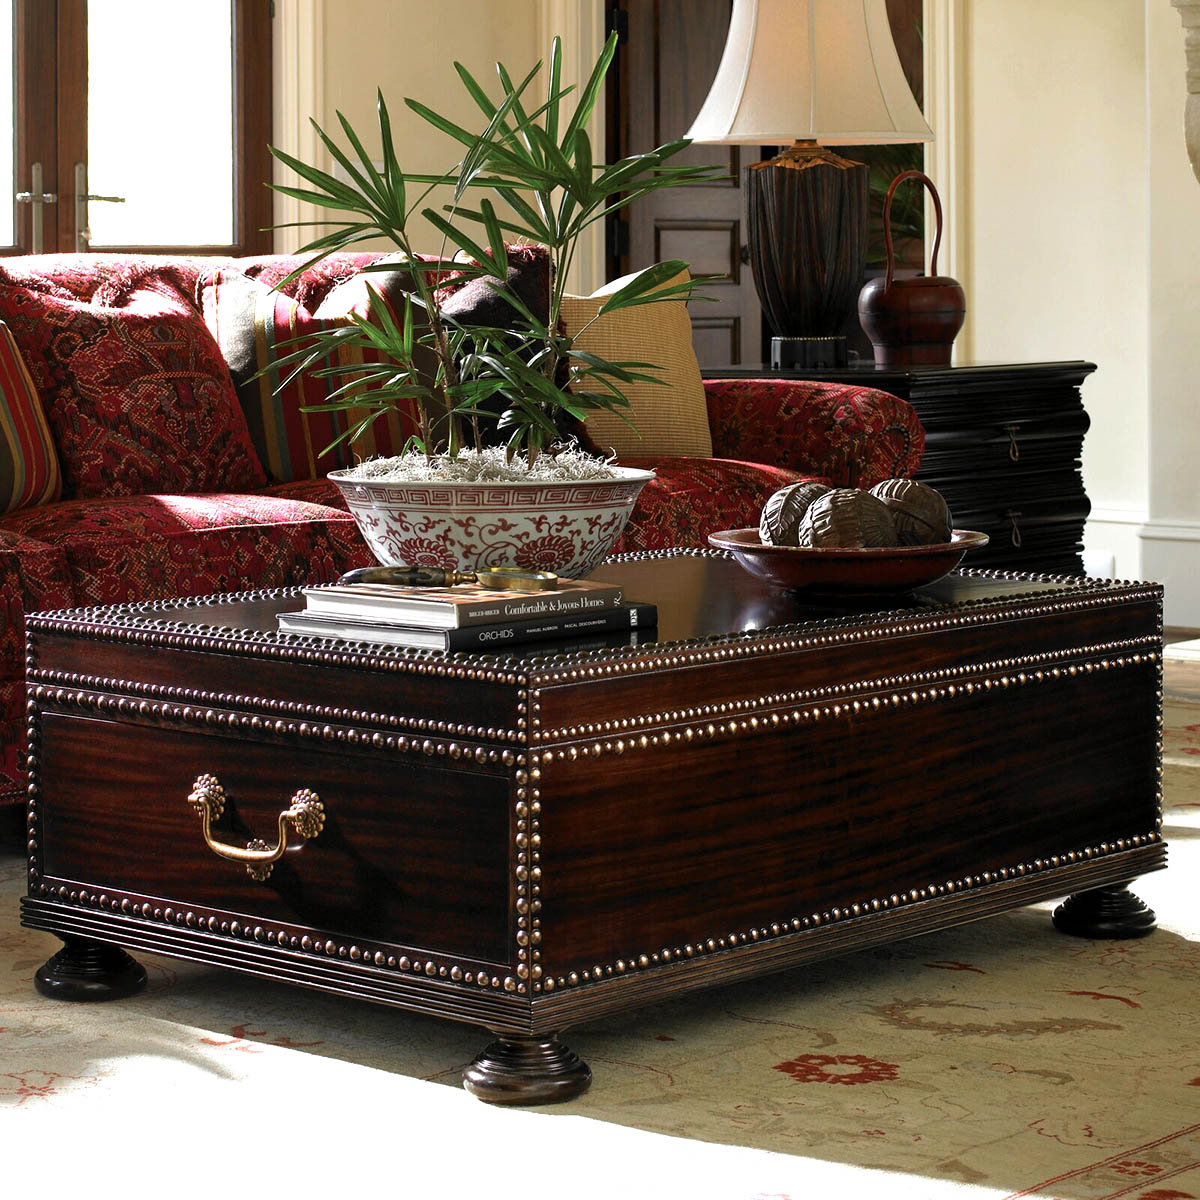 How To Build A Trunk Coffee Table